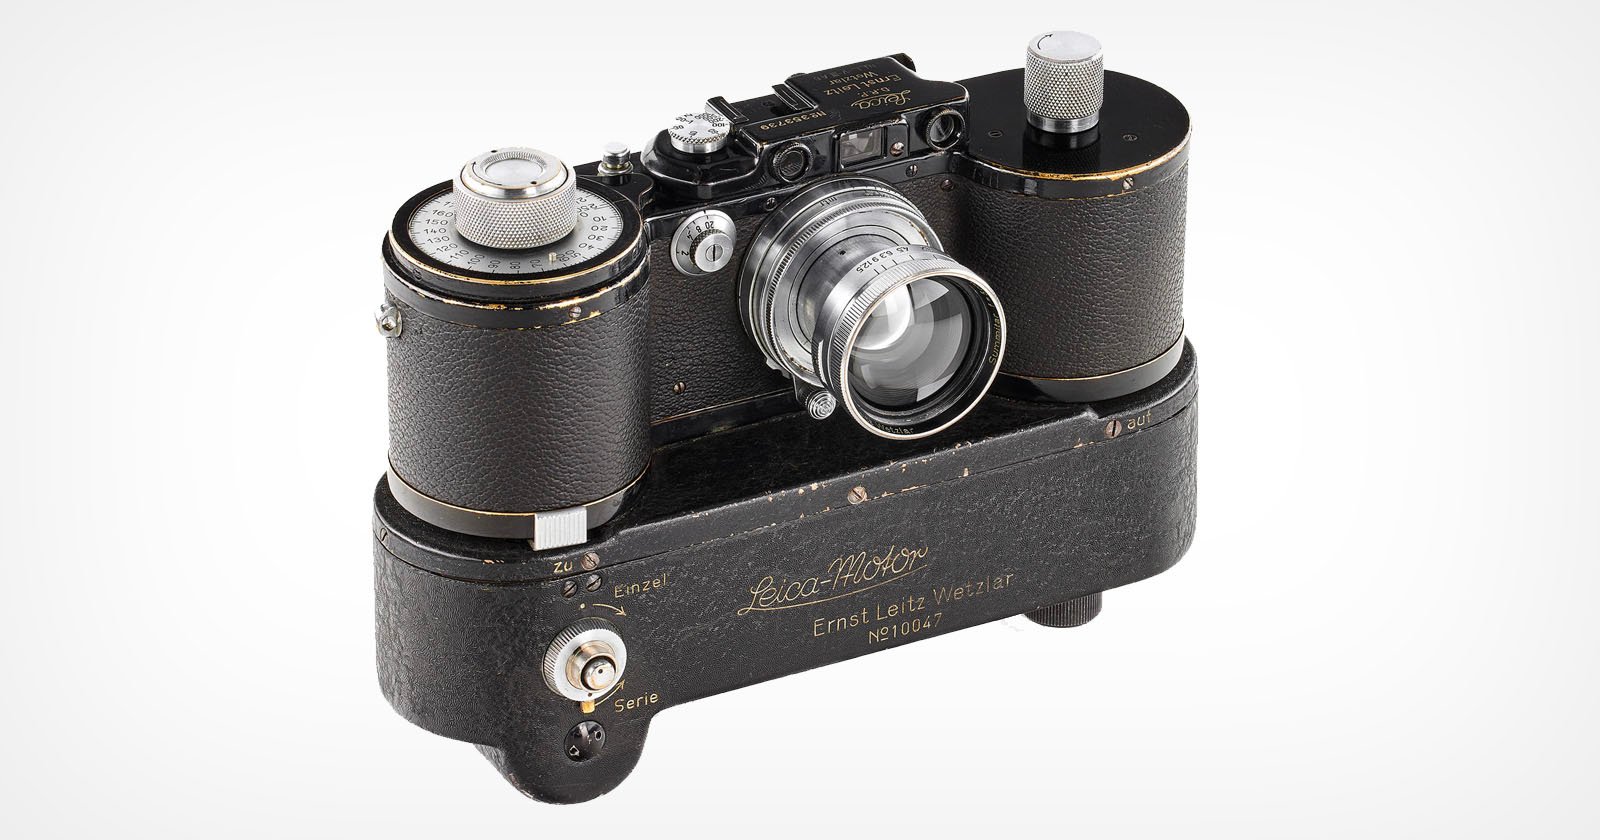 Rare Leica 35mm Camera That Holds 250 Photos Sells for Nearly $1M